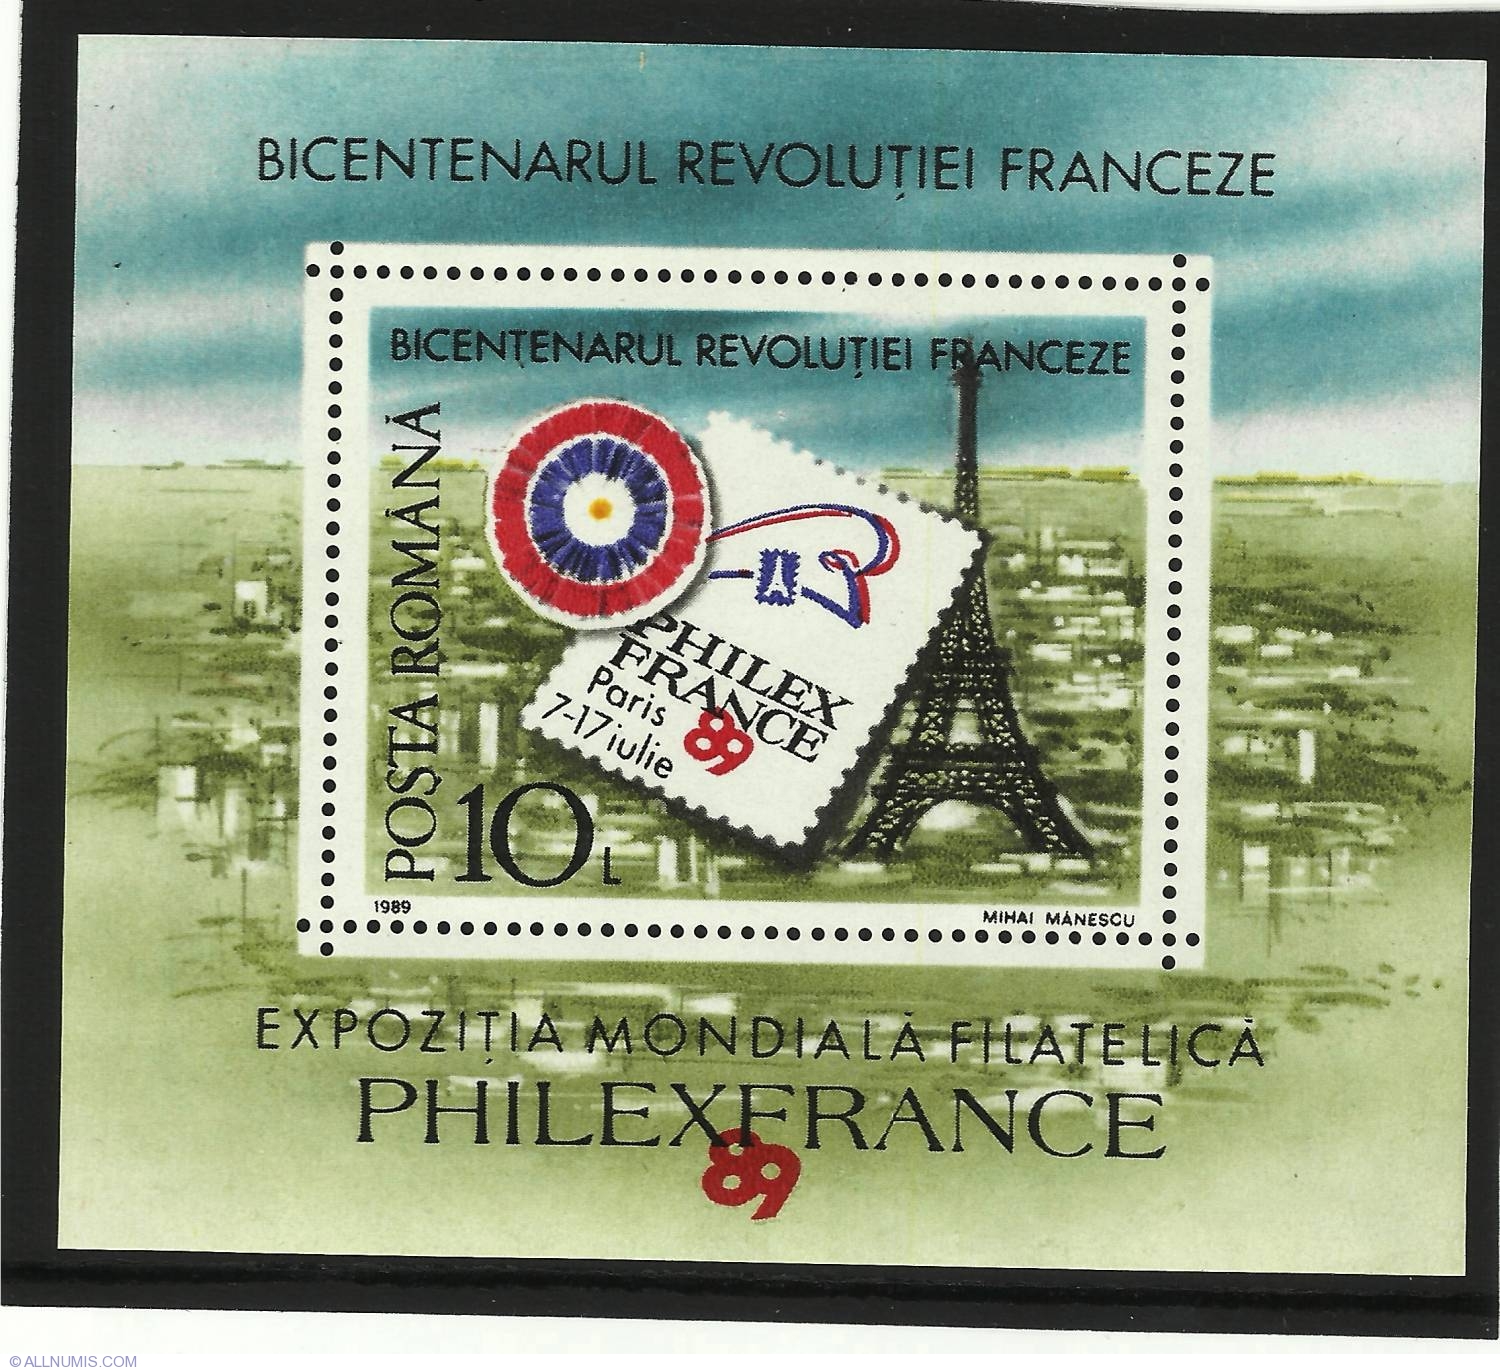 10 Lei - Bicentennial of the French Revolution, 1989 - Romania - Stamp ...